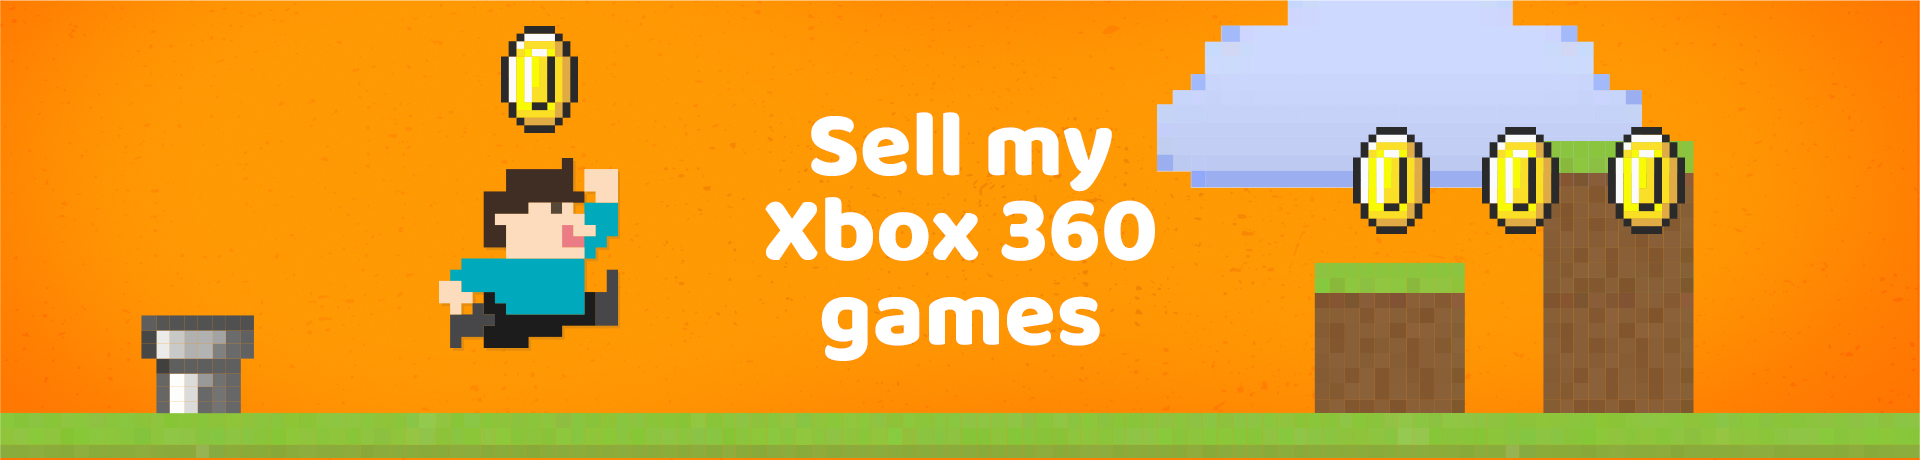 Sell Xbox 360 Games